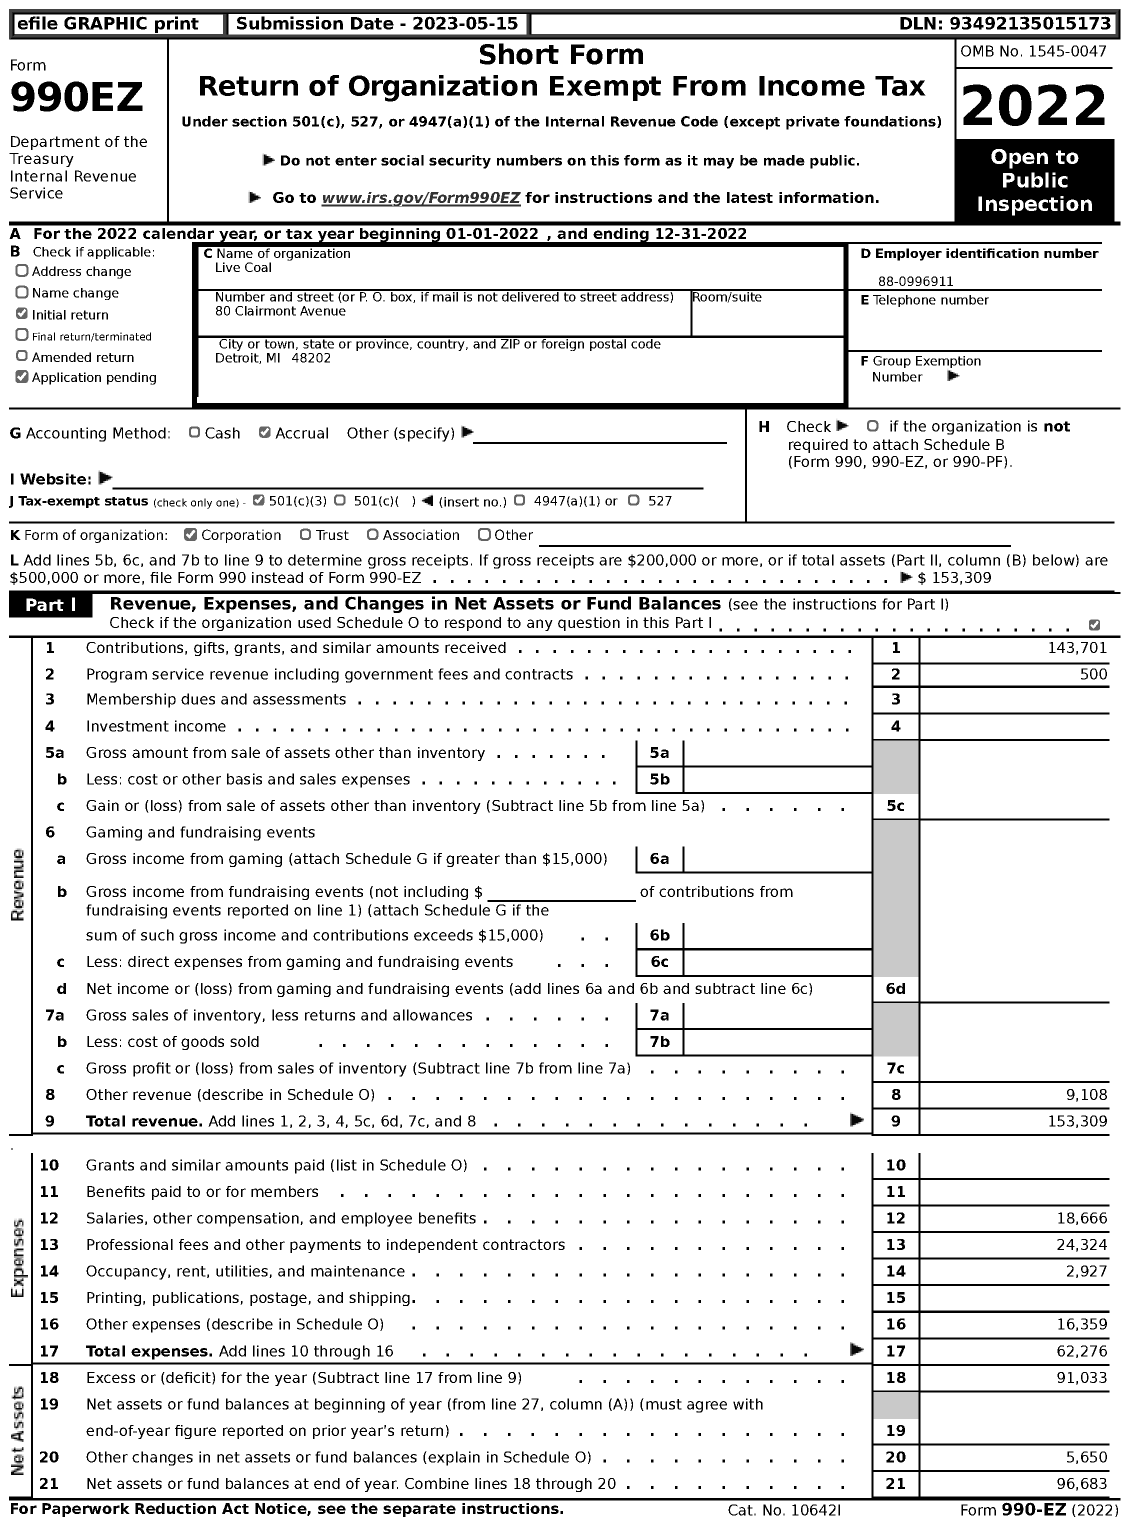 Image of first page of 2022 Form 990EZ for Live Coal